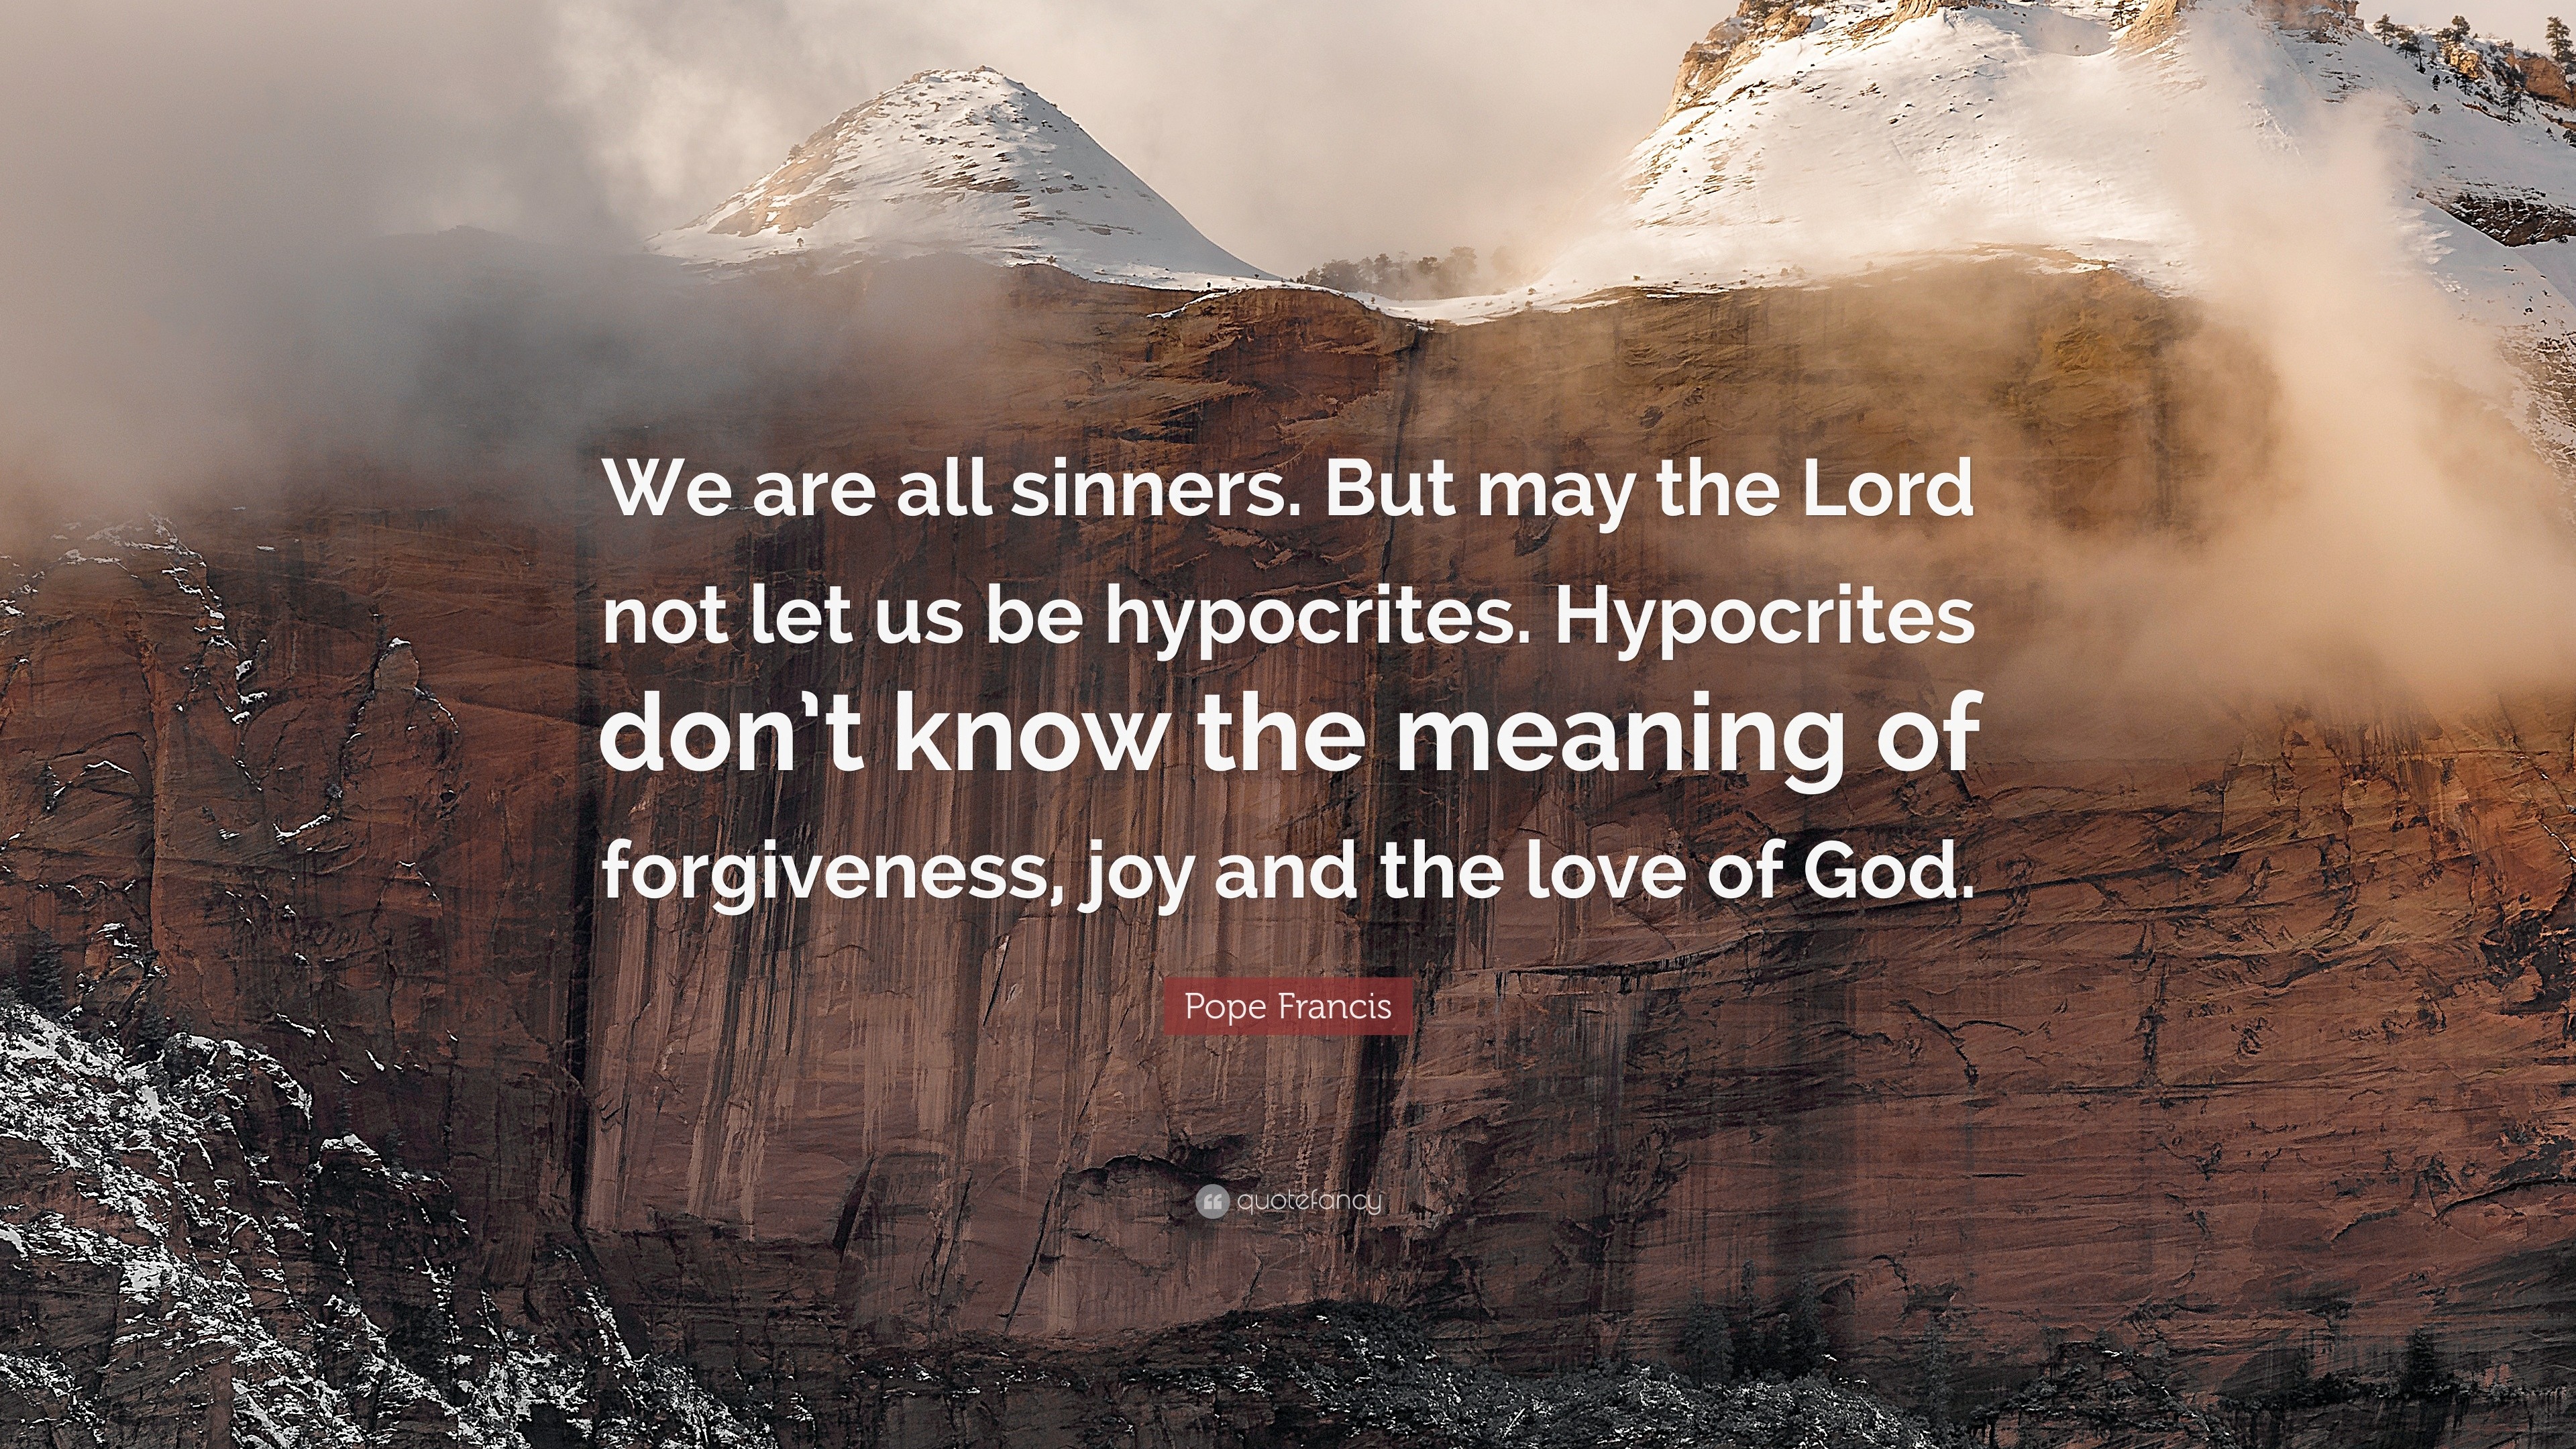 Pope Francis Quote “We are all sinners But may the Lord not let